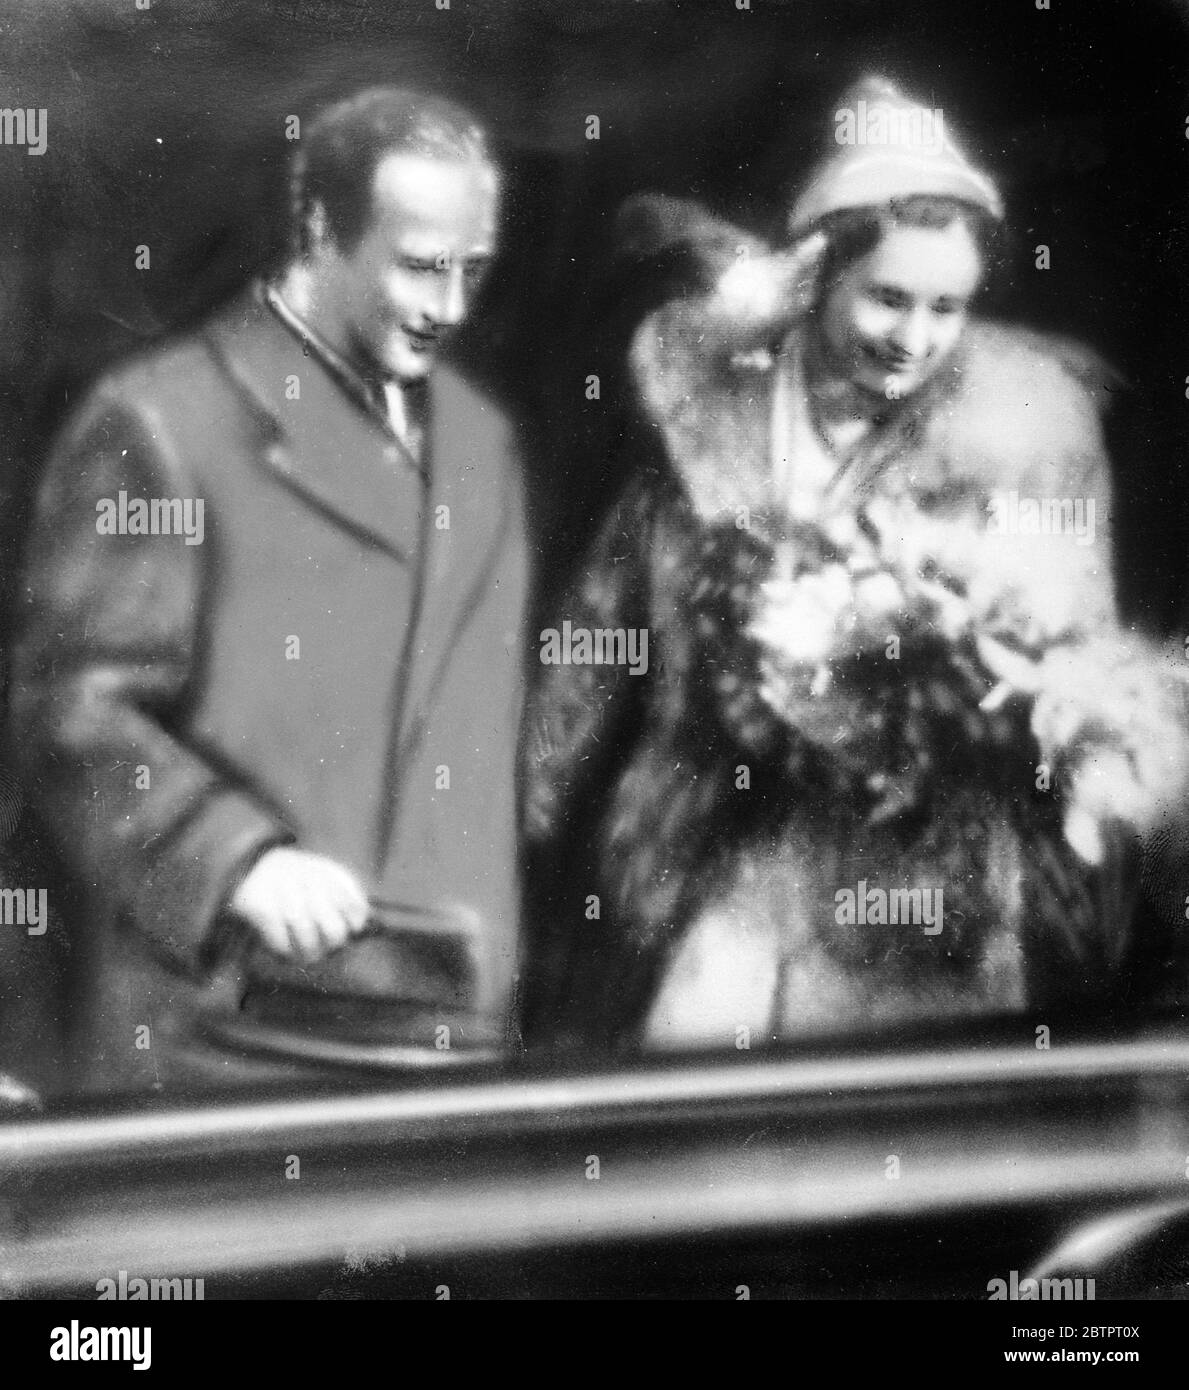 Telephoto. Prince Starhemberg weds actress in Vienna. Prince Starhemberg , the former vice chancellor of Austria, was married to Fraulein Nora Gregor, leading lady at the Vienna State theatre, in Vienna. The ceremony was conducted by Cardinal Innitzer, Archbishop of Vienna, in the private chapel of the Bishops Palace. Photo shows, Prince Starhemberg and his bride, leaving the Chapel after the wedding. 2 December 1937 Stock Photo